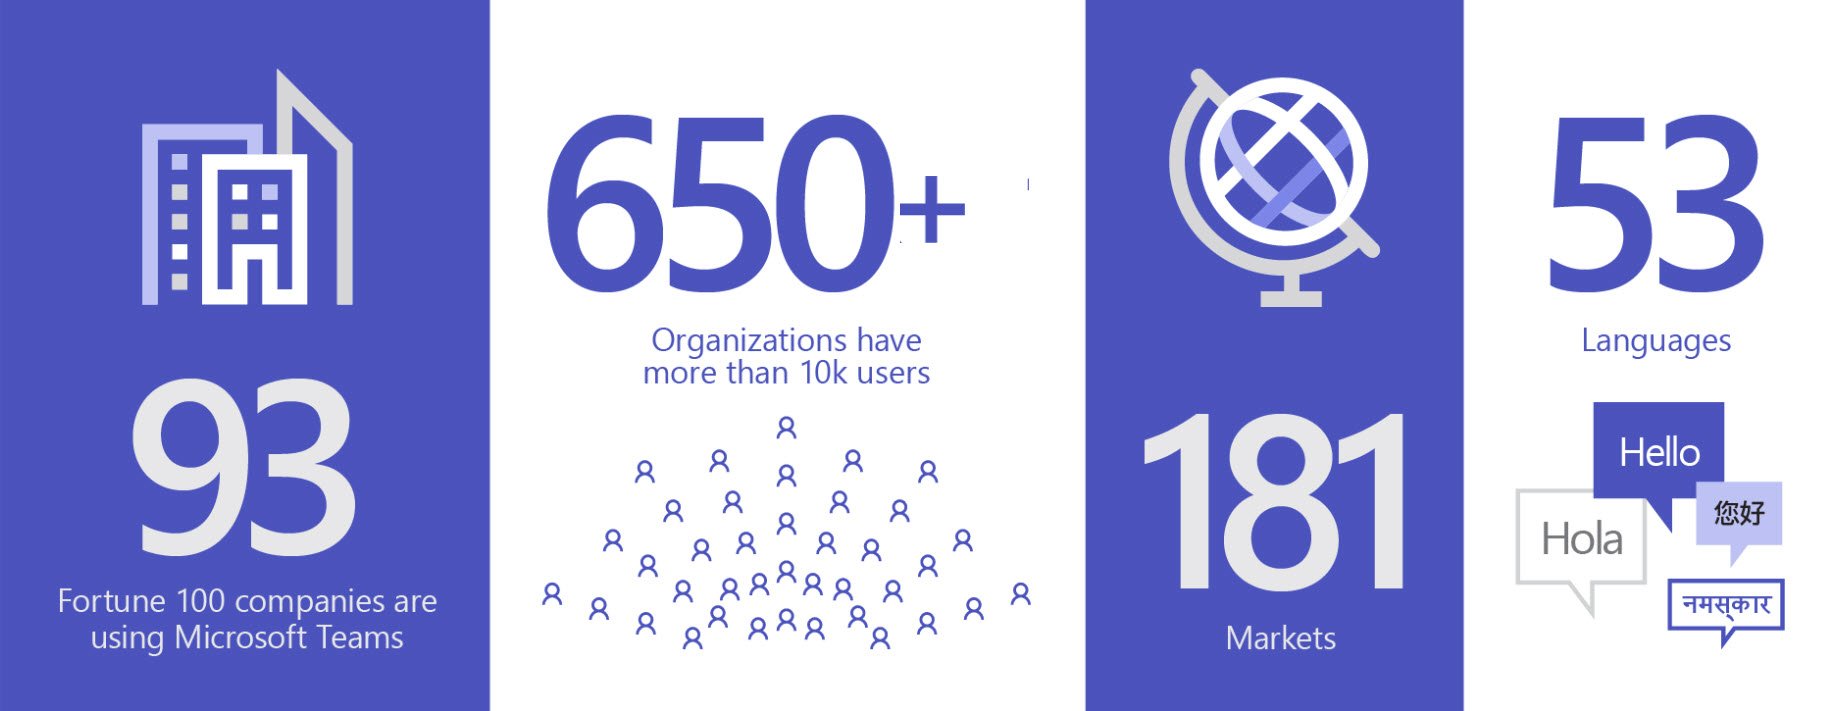 Microsoft Teams Infographic March 2020